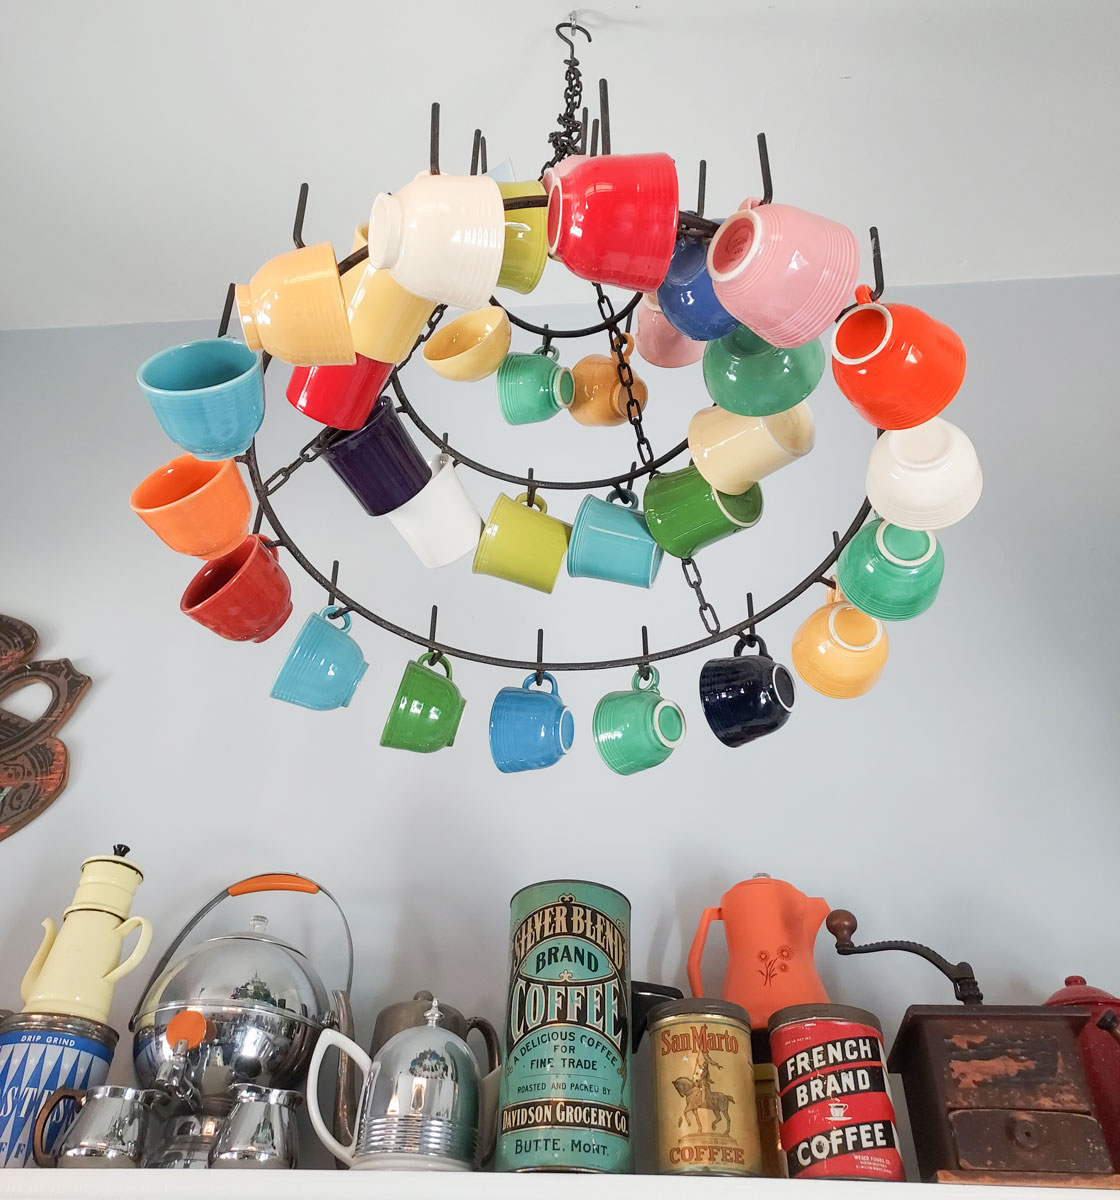 A chandelier of colorful coffee mugs hangs near vintage coffee tins and equipment at Moonlight Coffee & Tea in Encinitas. Photo by Ryan Woldt